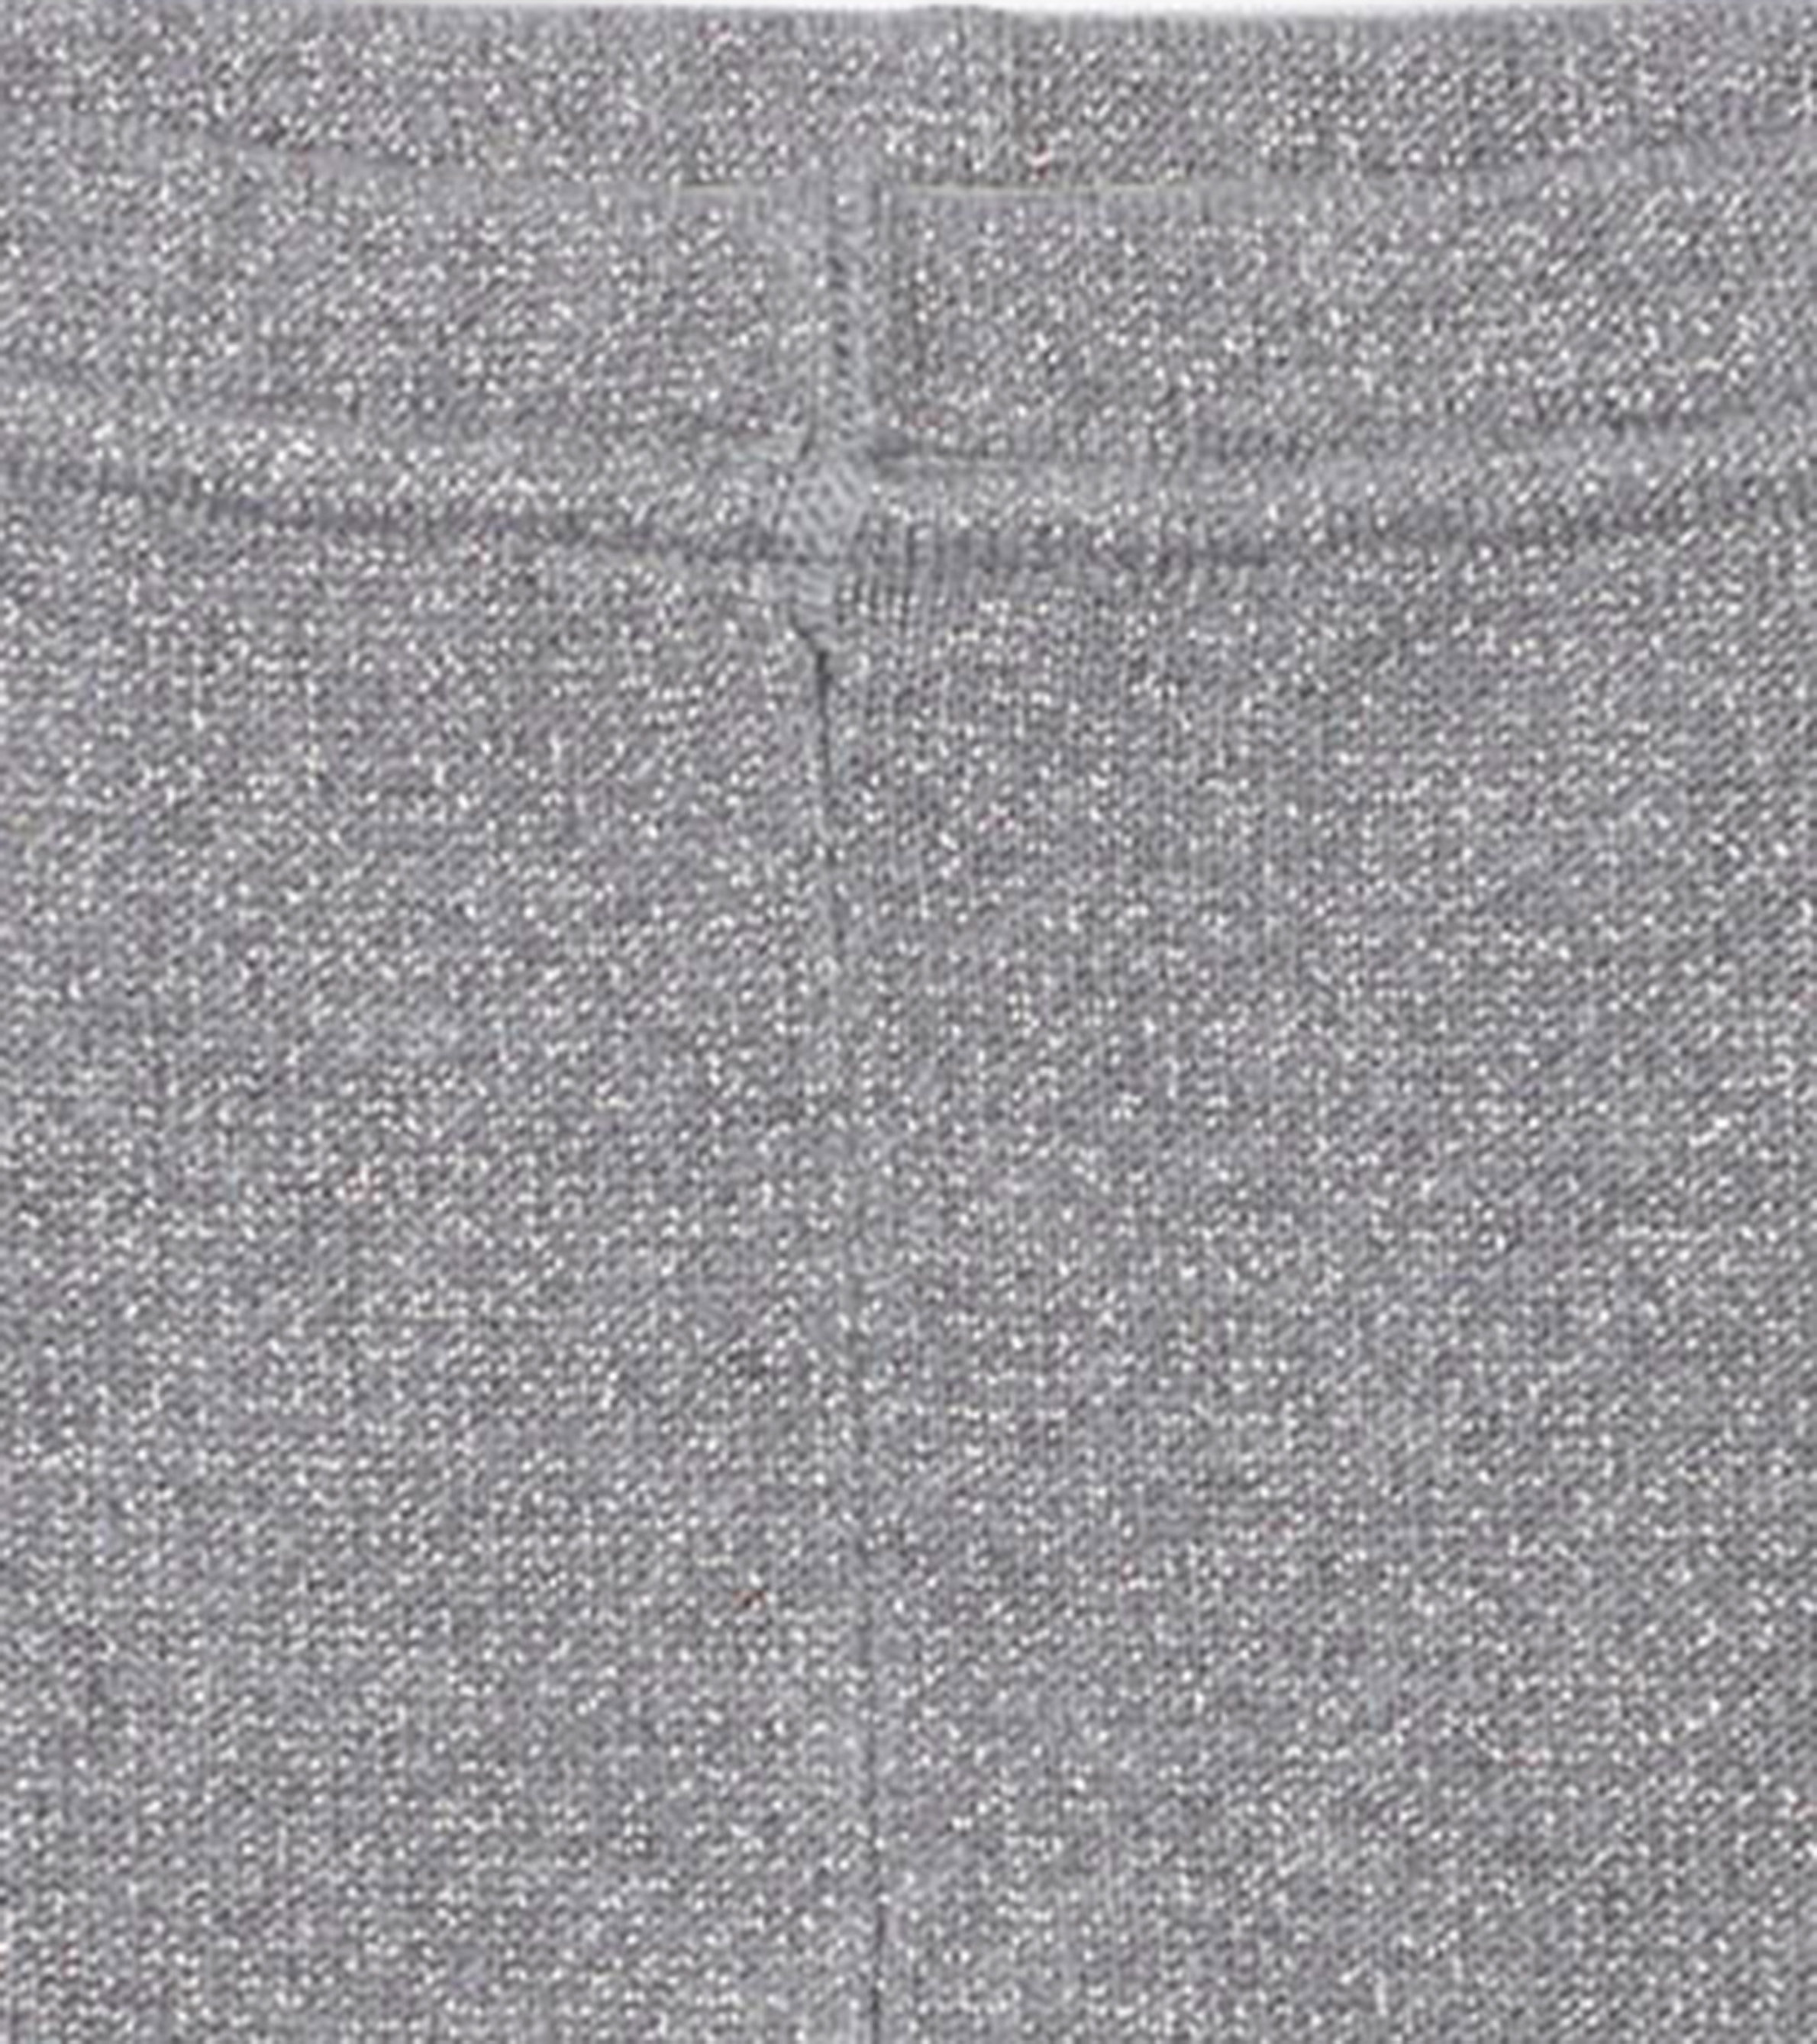 Hatley Silver Shimmer Cable Knit Leggings – Baby Go Round, Inc.